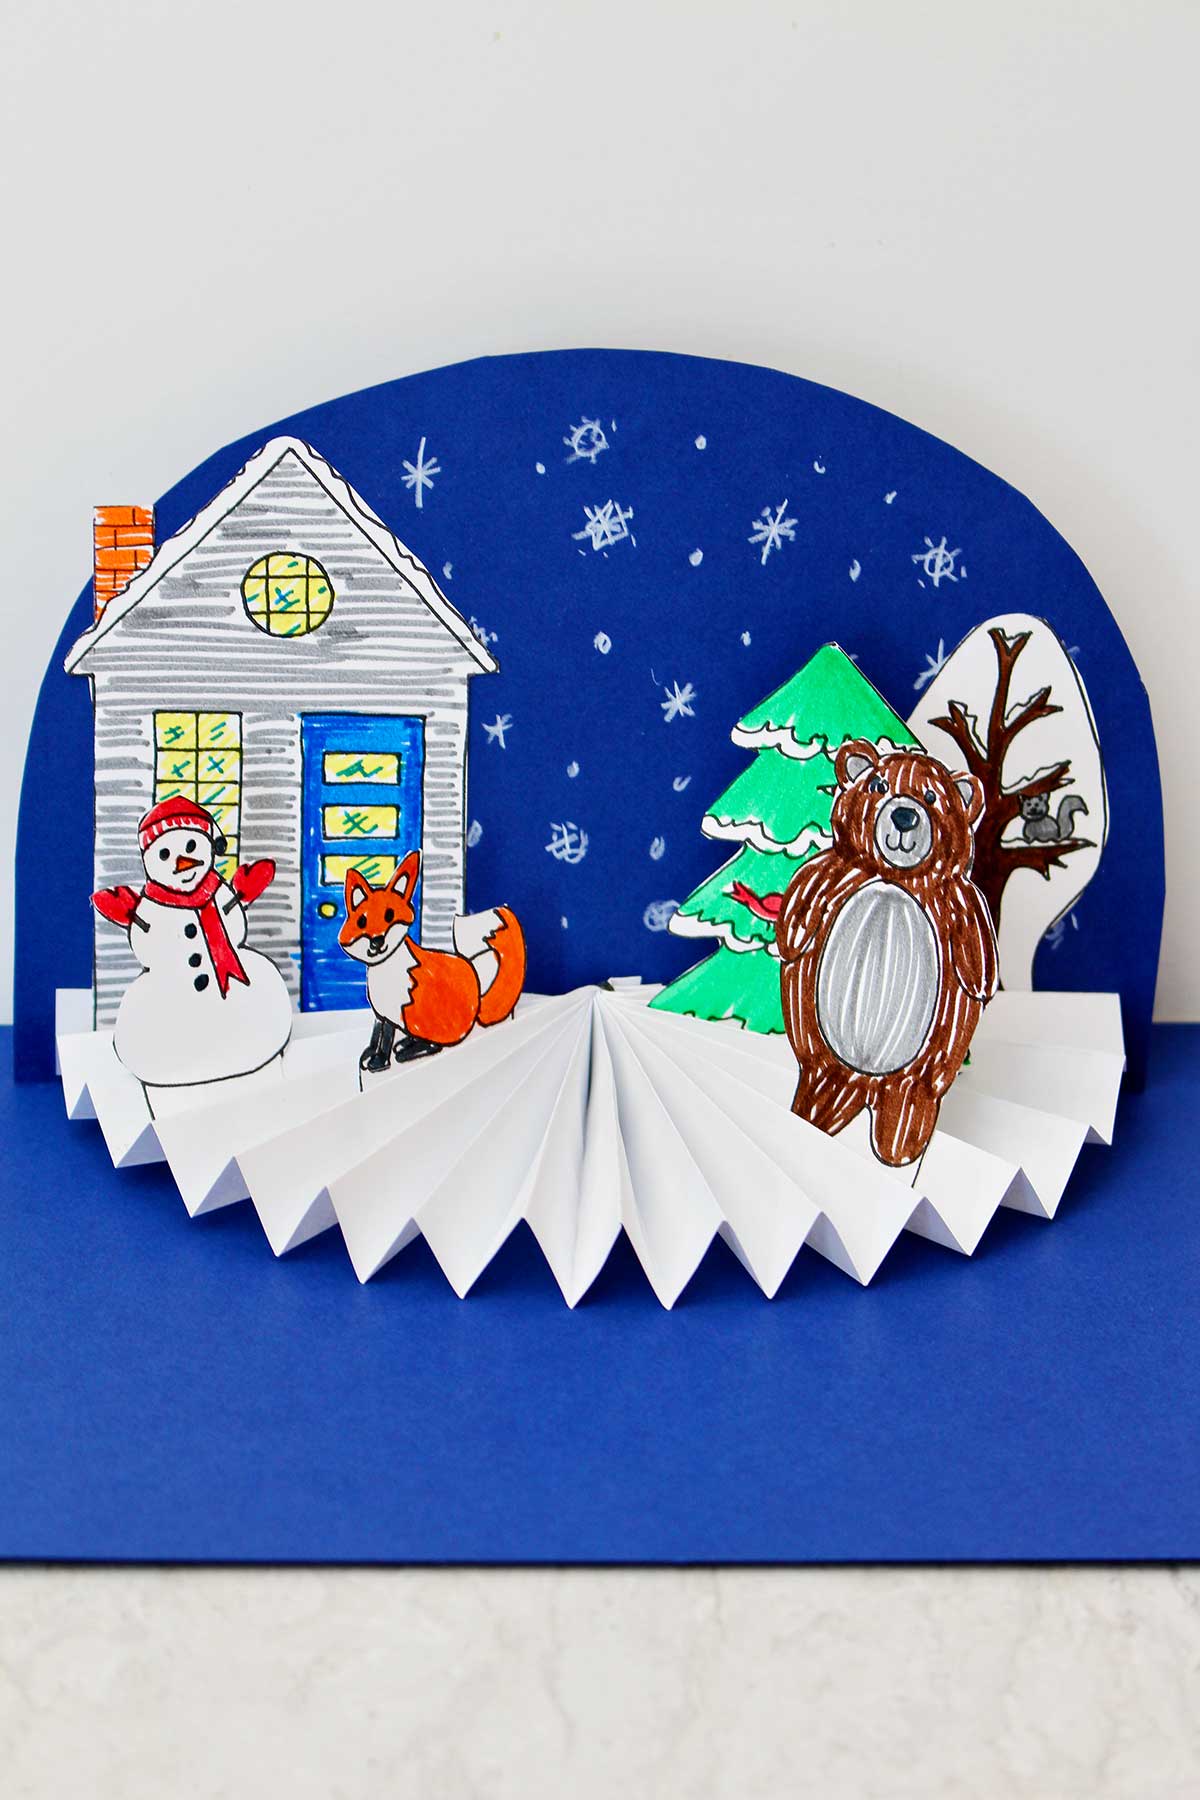 Completed Easy Paper Fan Craft in a winter theme with a snowman, fox, bear and snowy blue background.